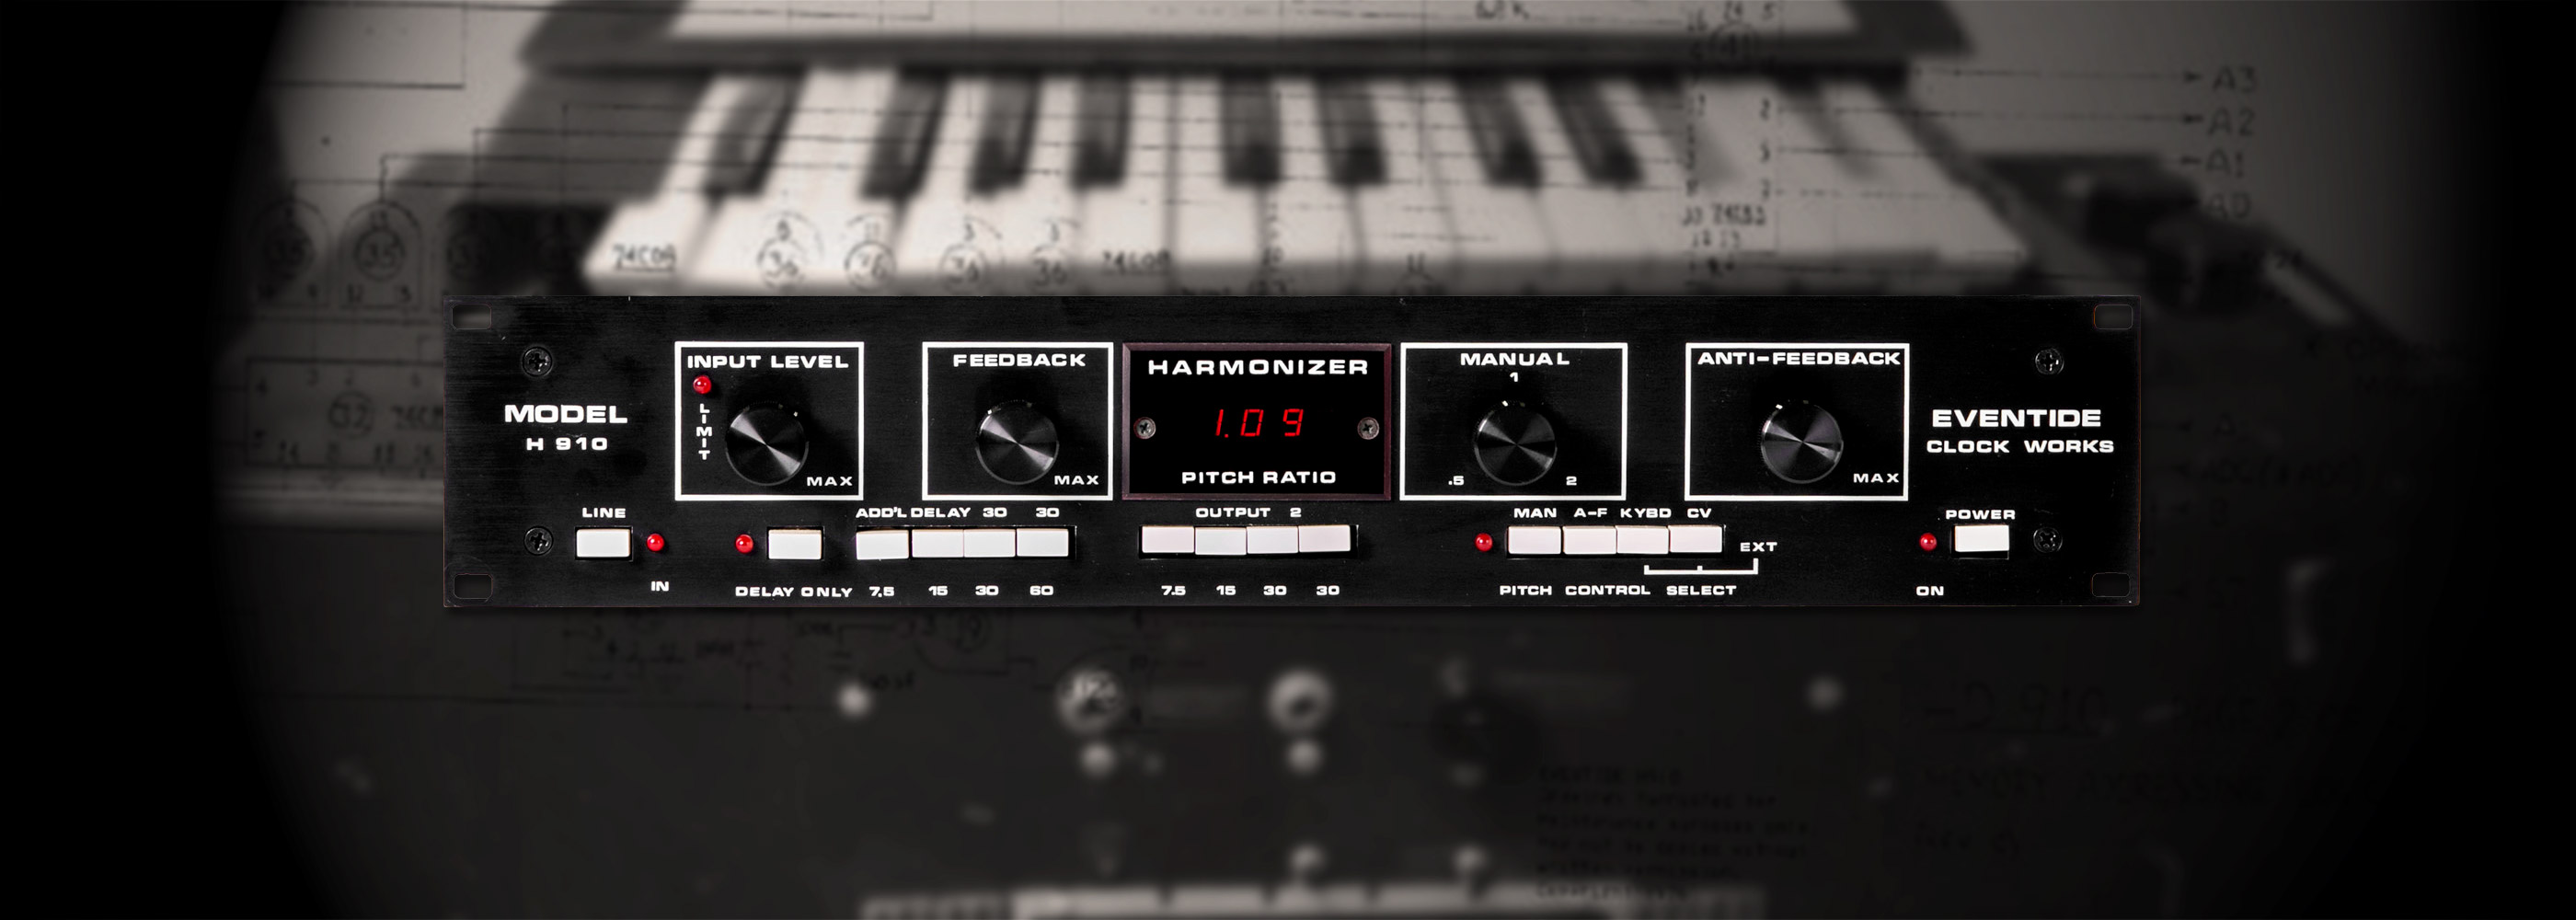 songs with eventide h910 harmonizer